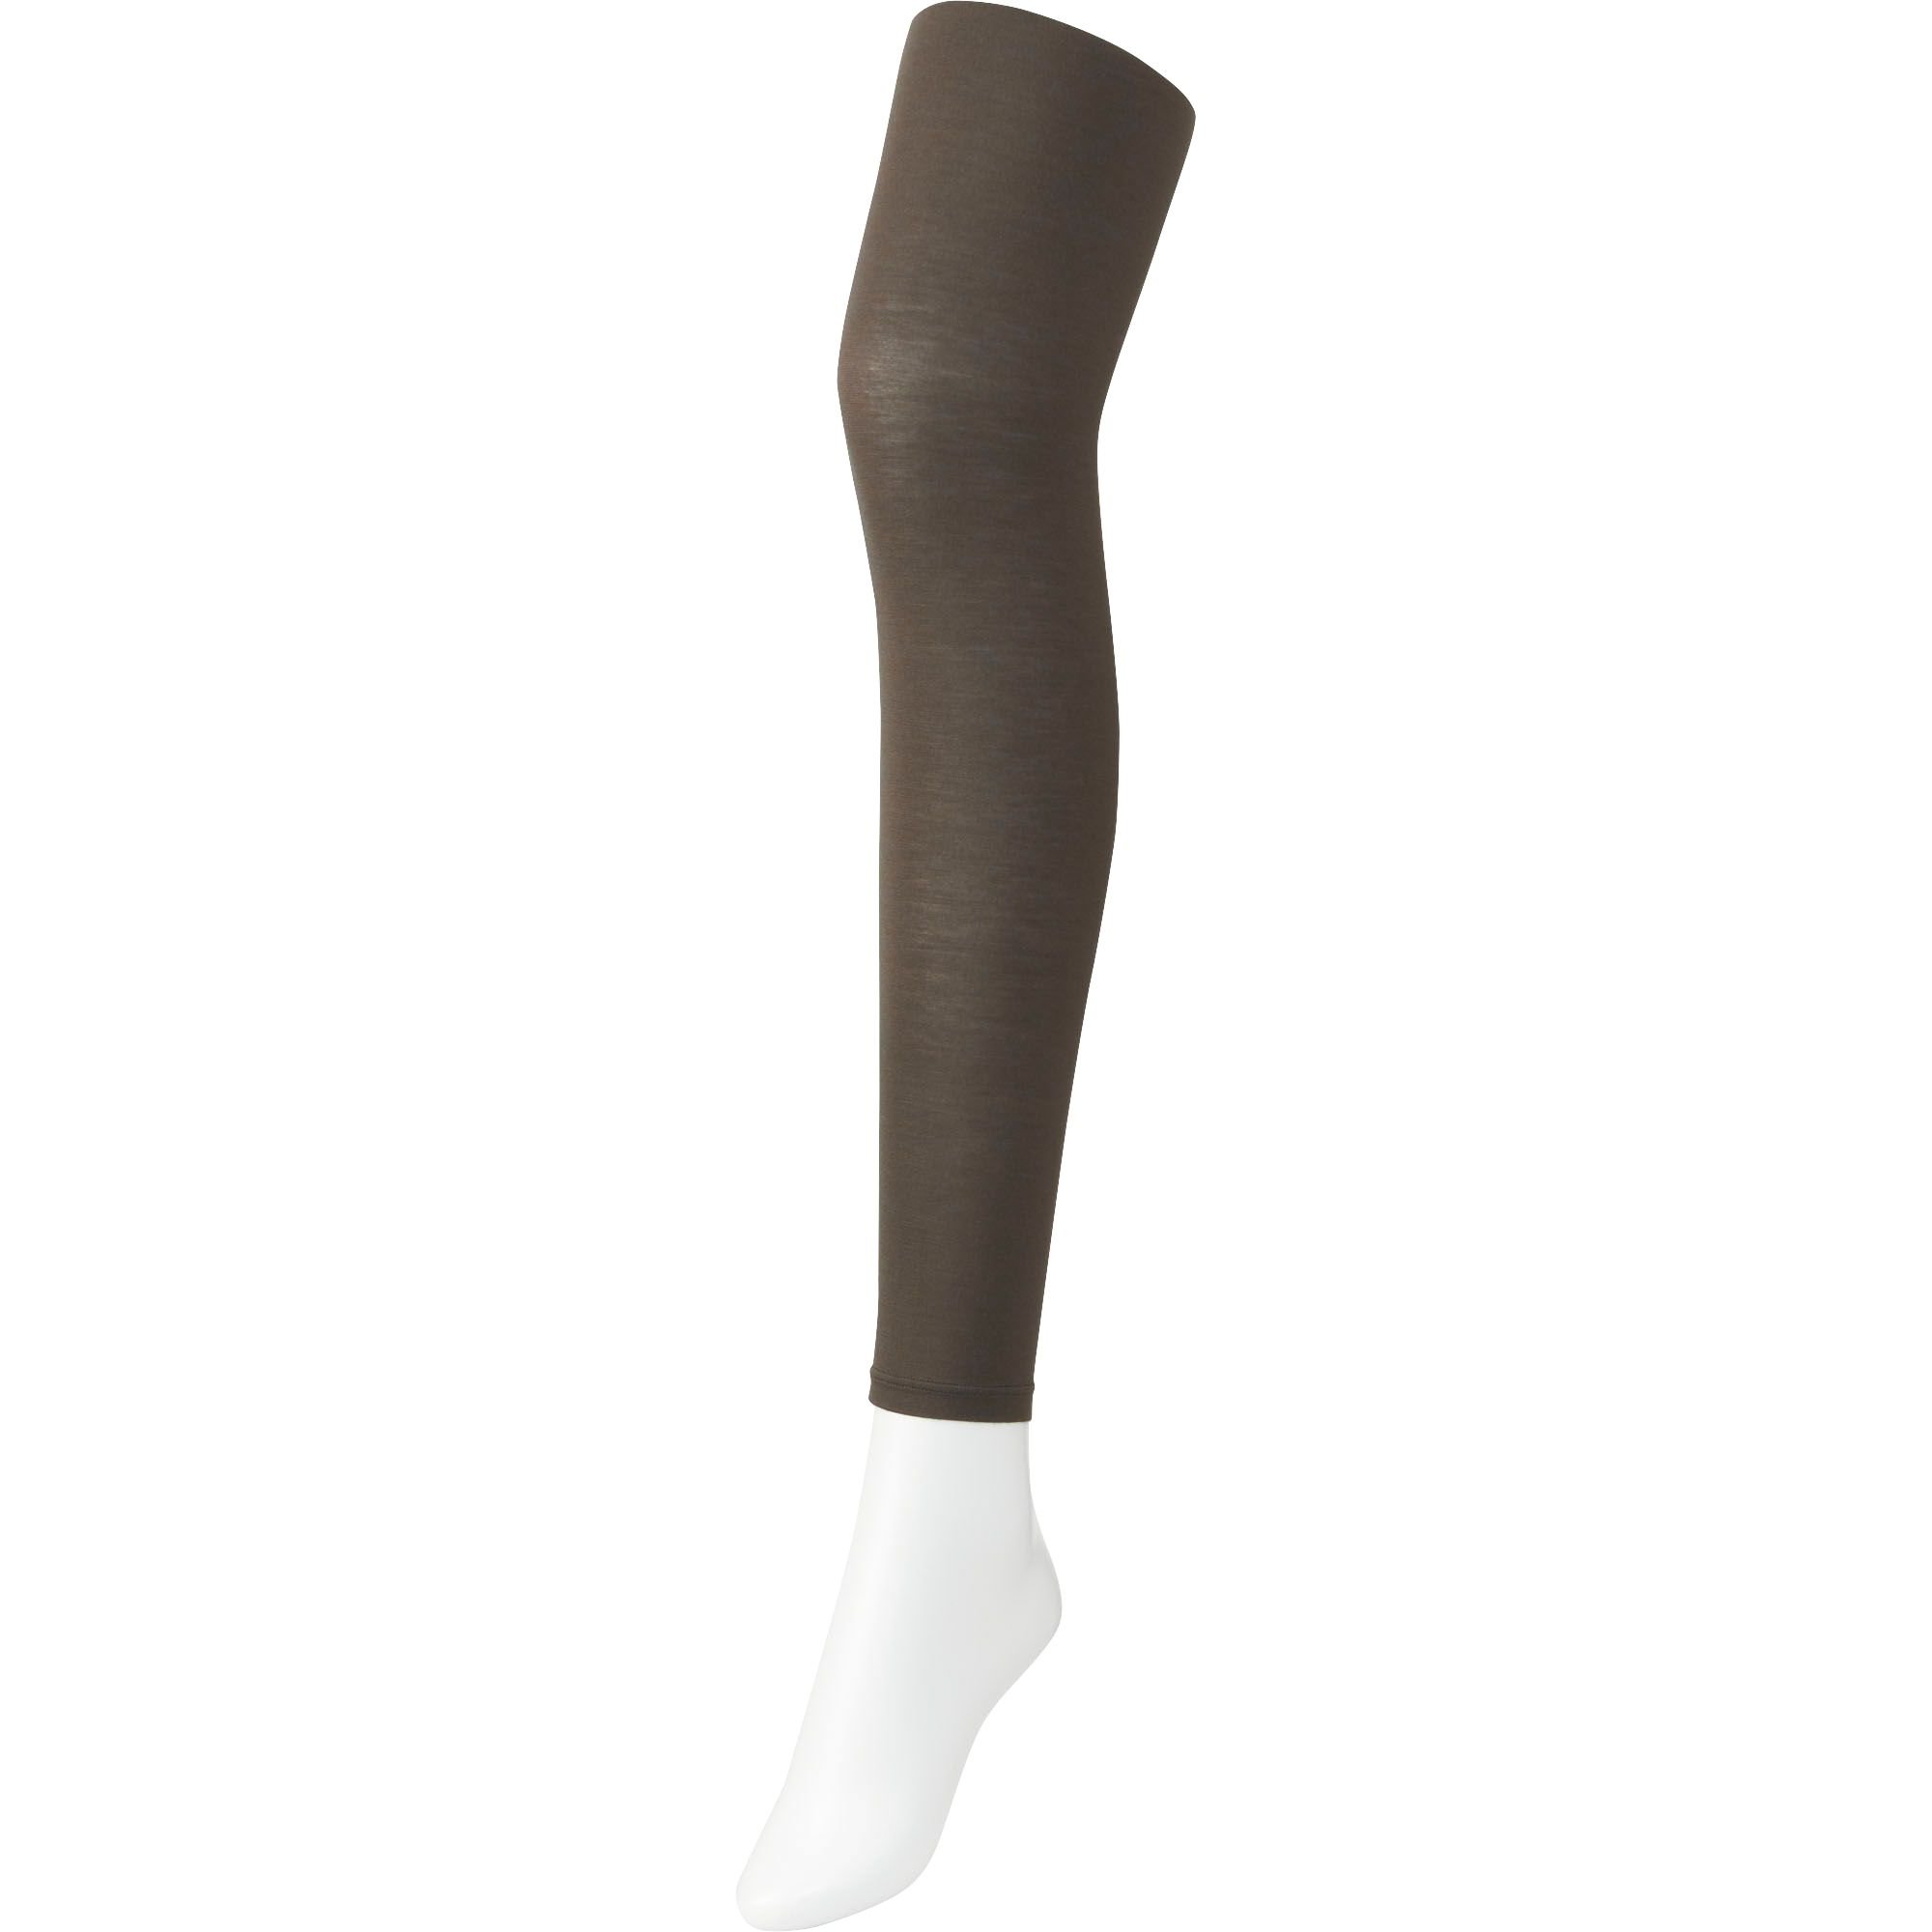 UNIQLO Women Heattech Knitted Tights (Check) ($3.90) ❤ liked on